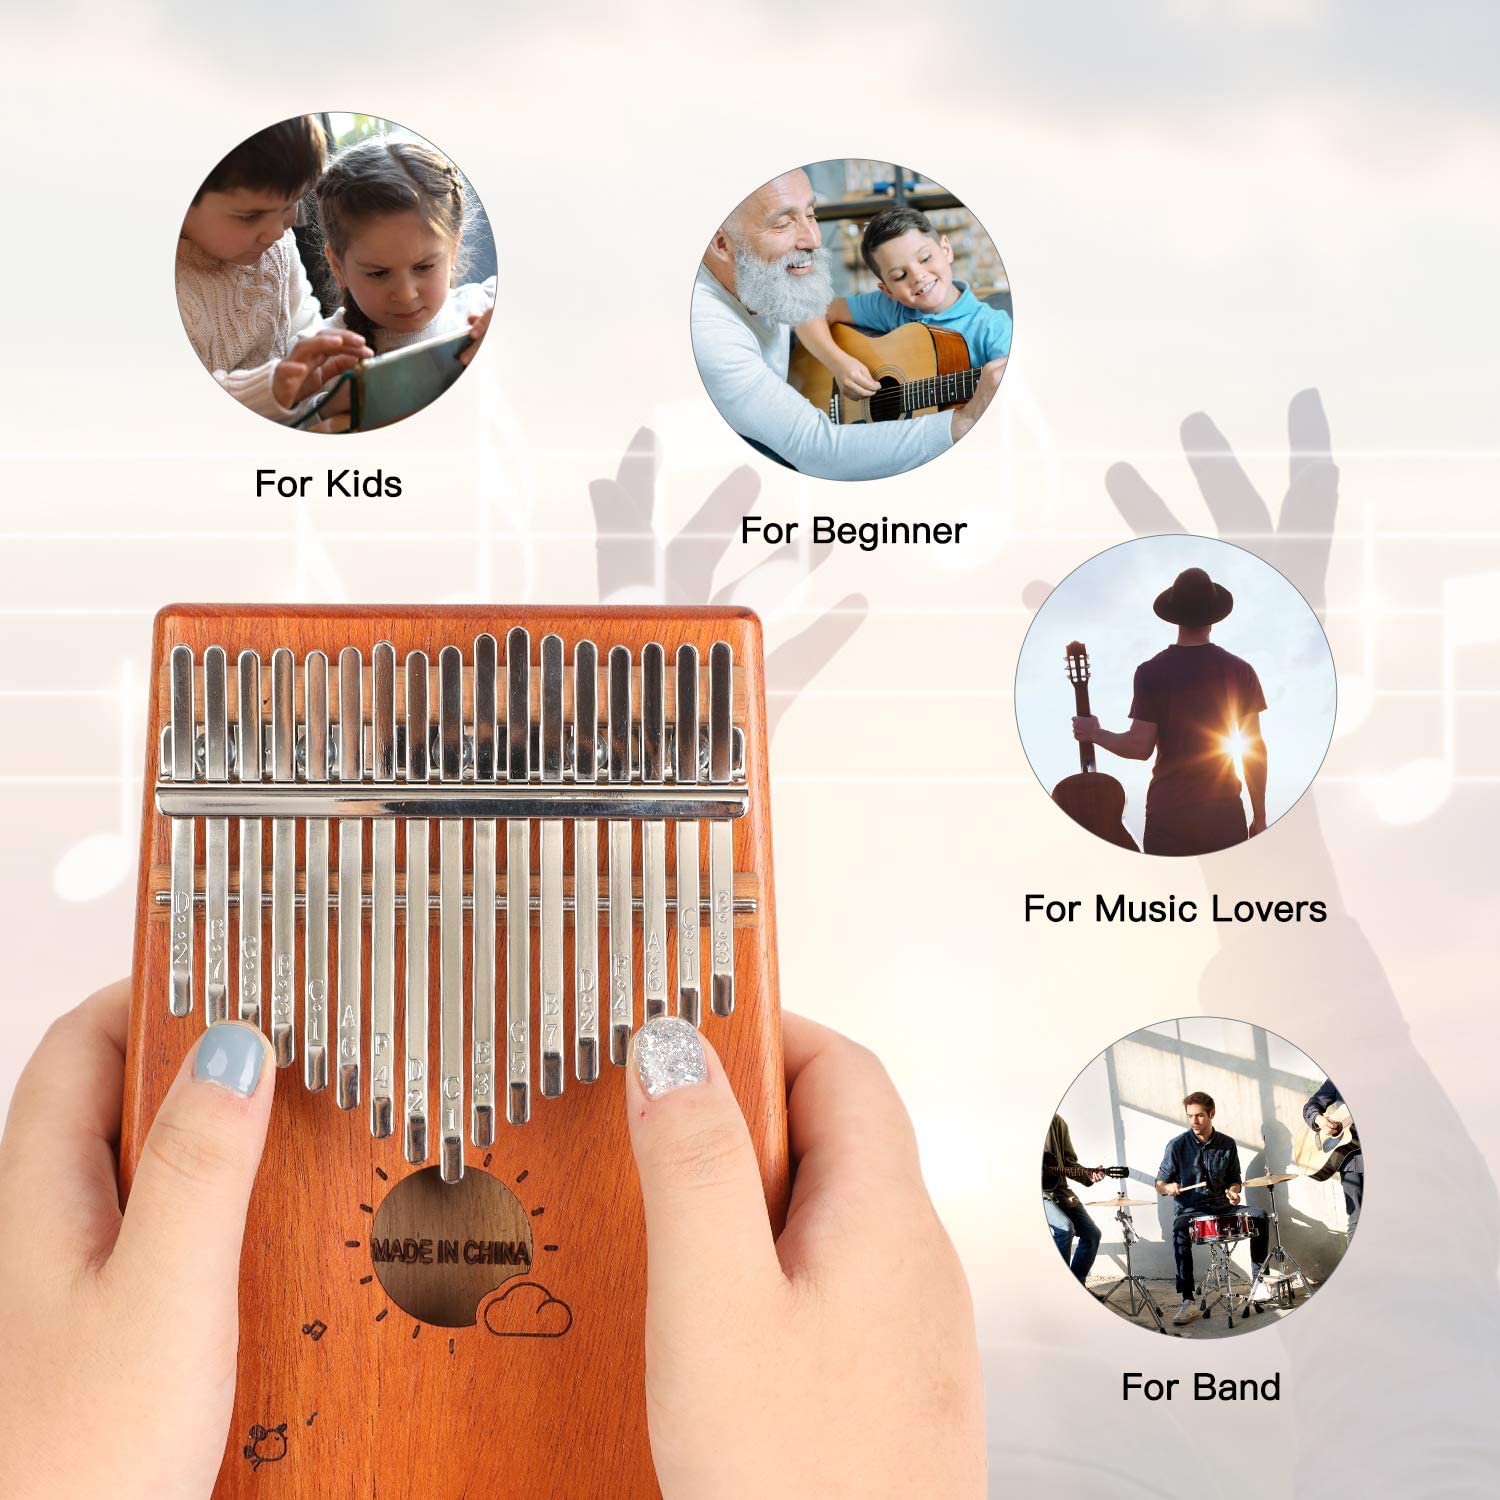 Kalimba 17 Keys Thumb Piano with Protective Box, Tuning Hammer and English Study Instruction. Portable Mbira Wood Finger Piano, Gifts for Kids and Adults Music Lovers